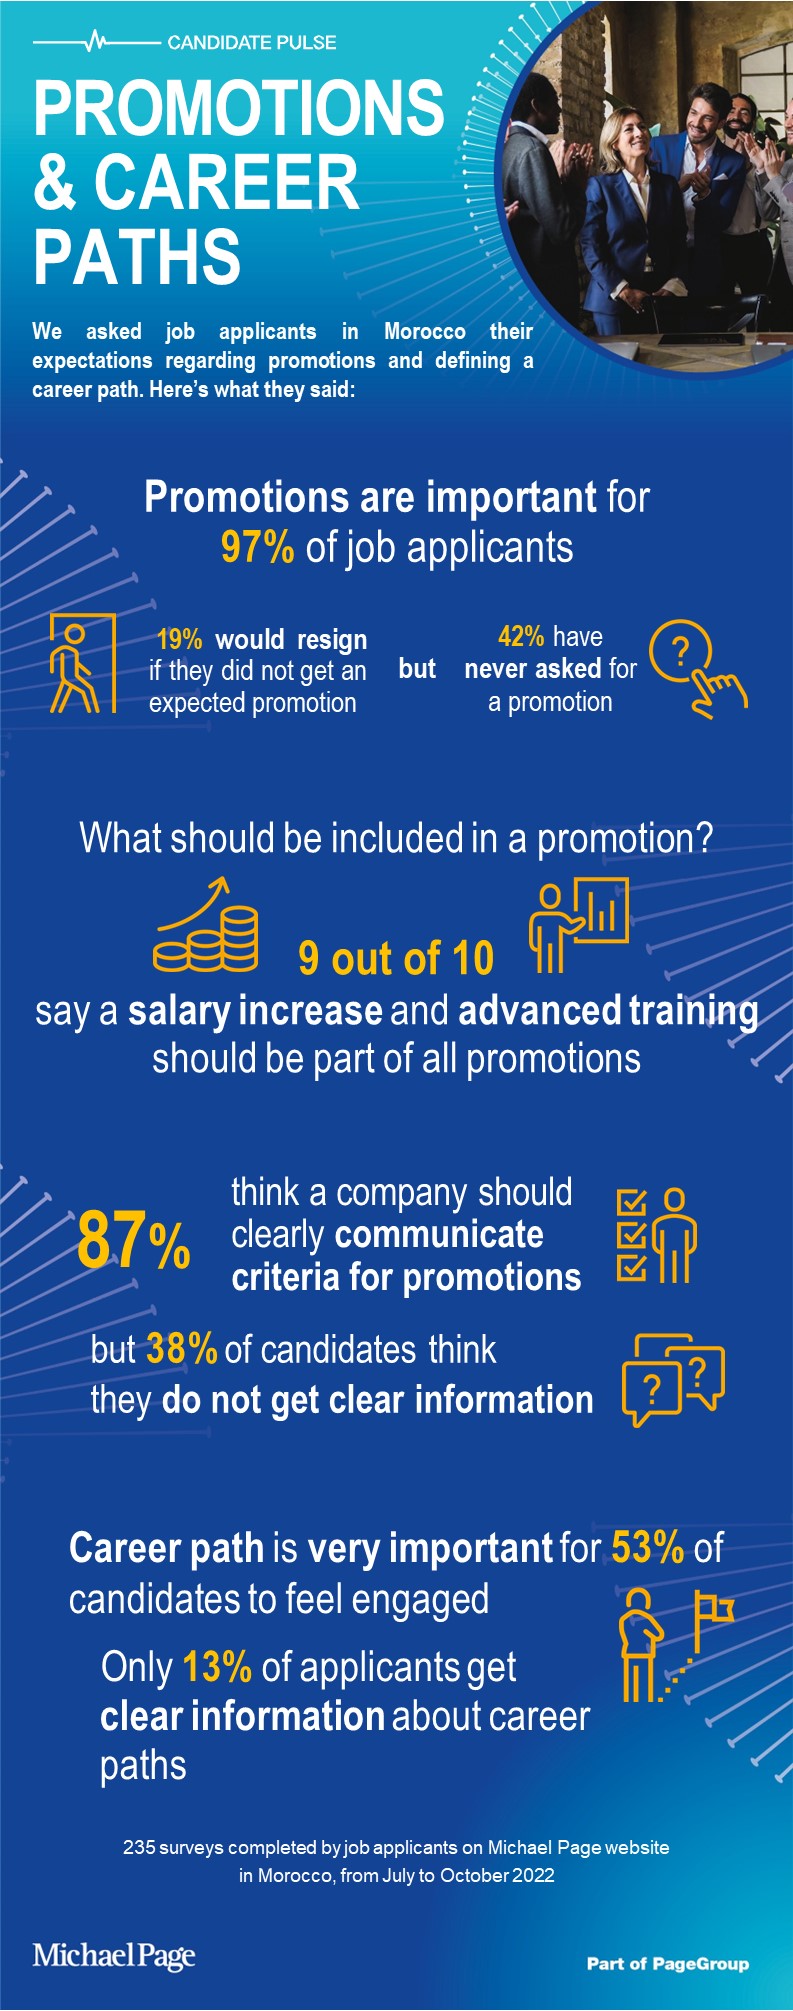 97% of job applicants believe that promotions are important 